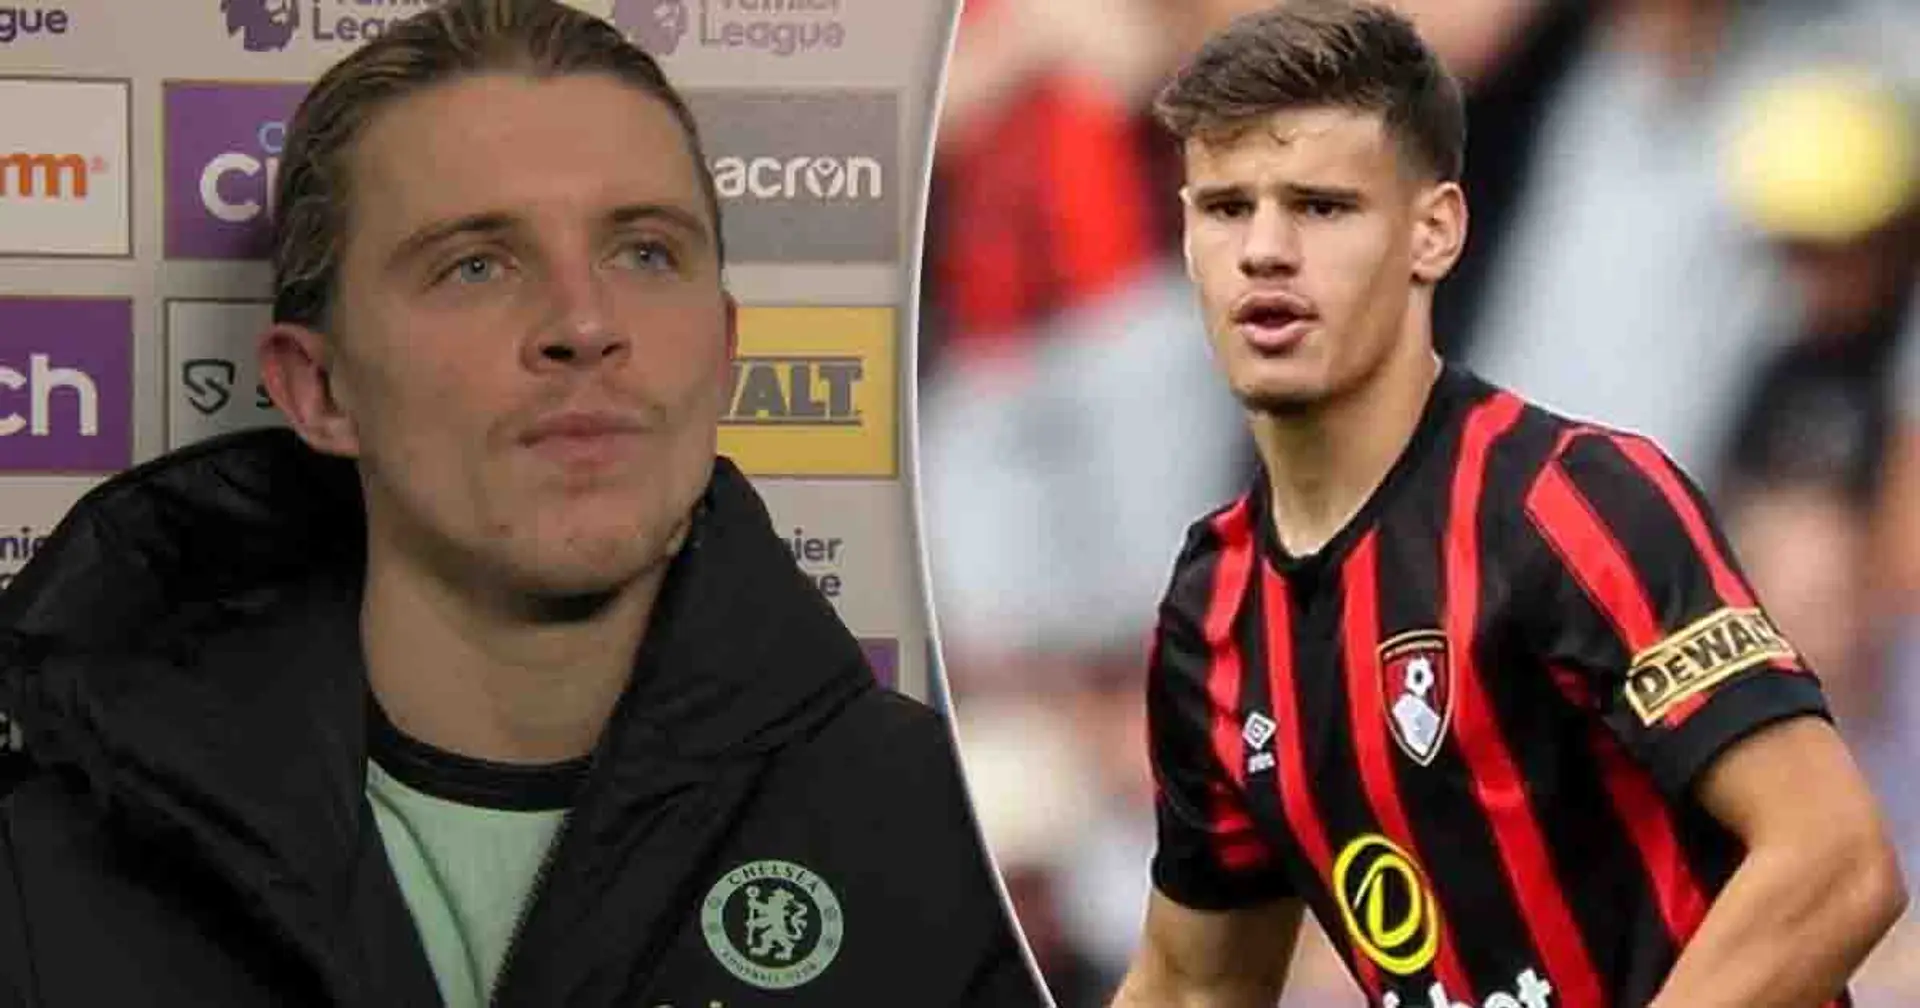 Chelsea scouting Bournemouth defender & 3 more under-radar stories you could've missed